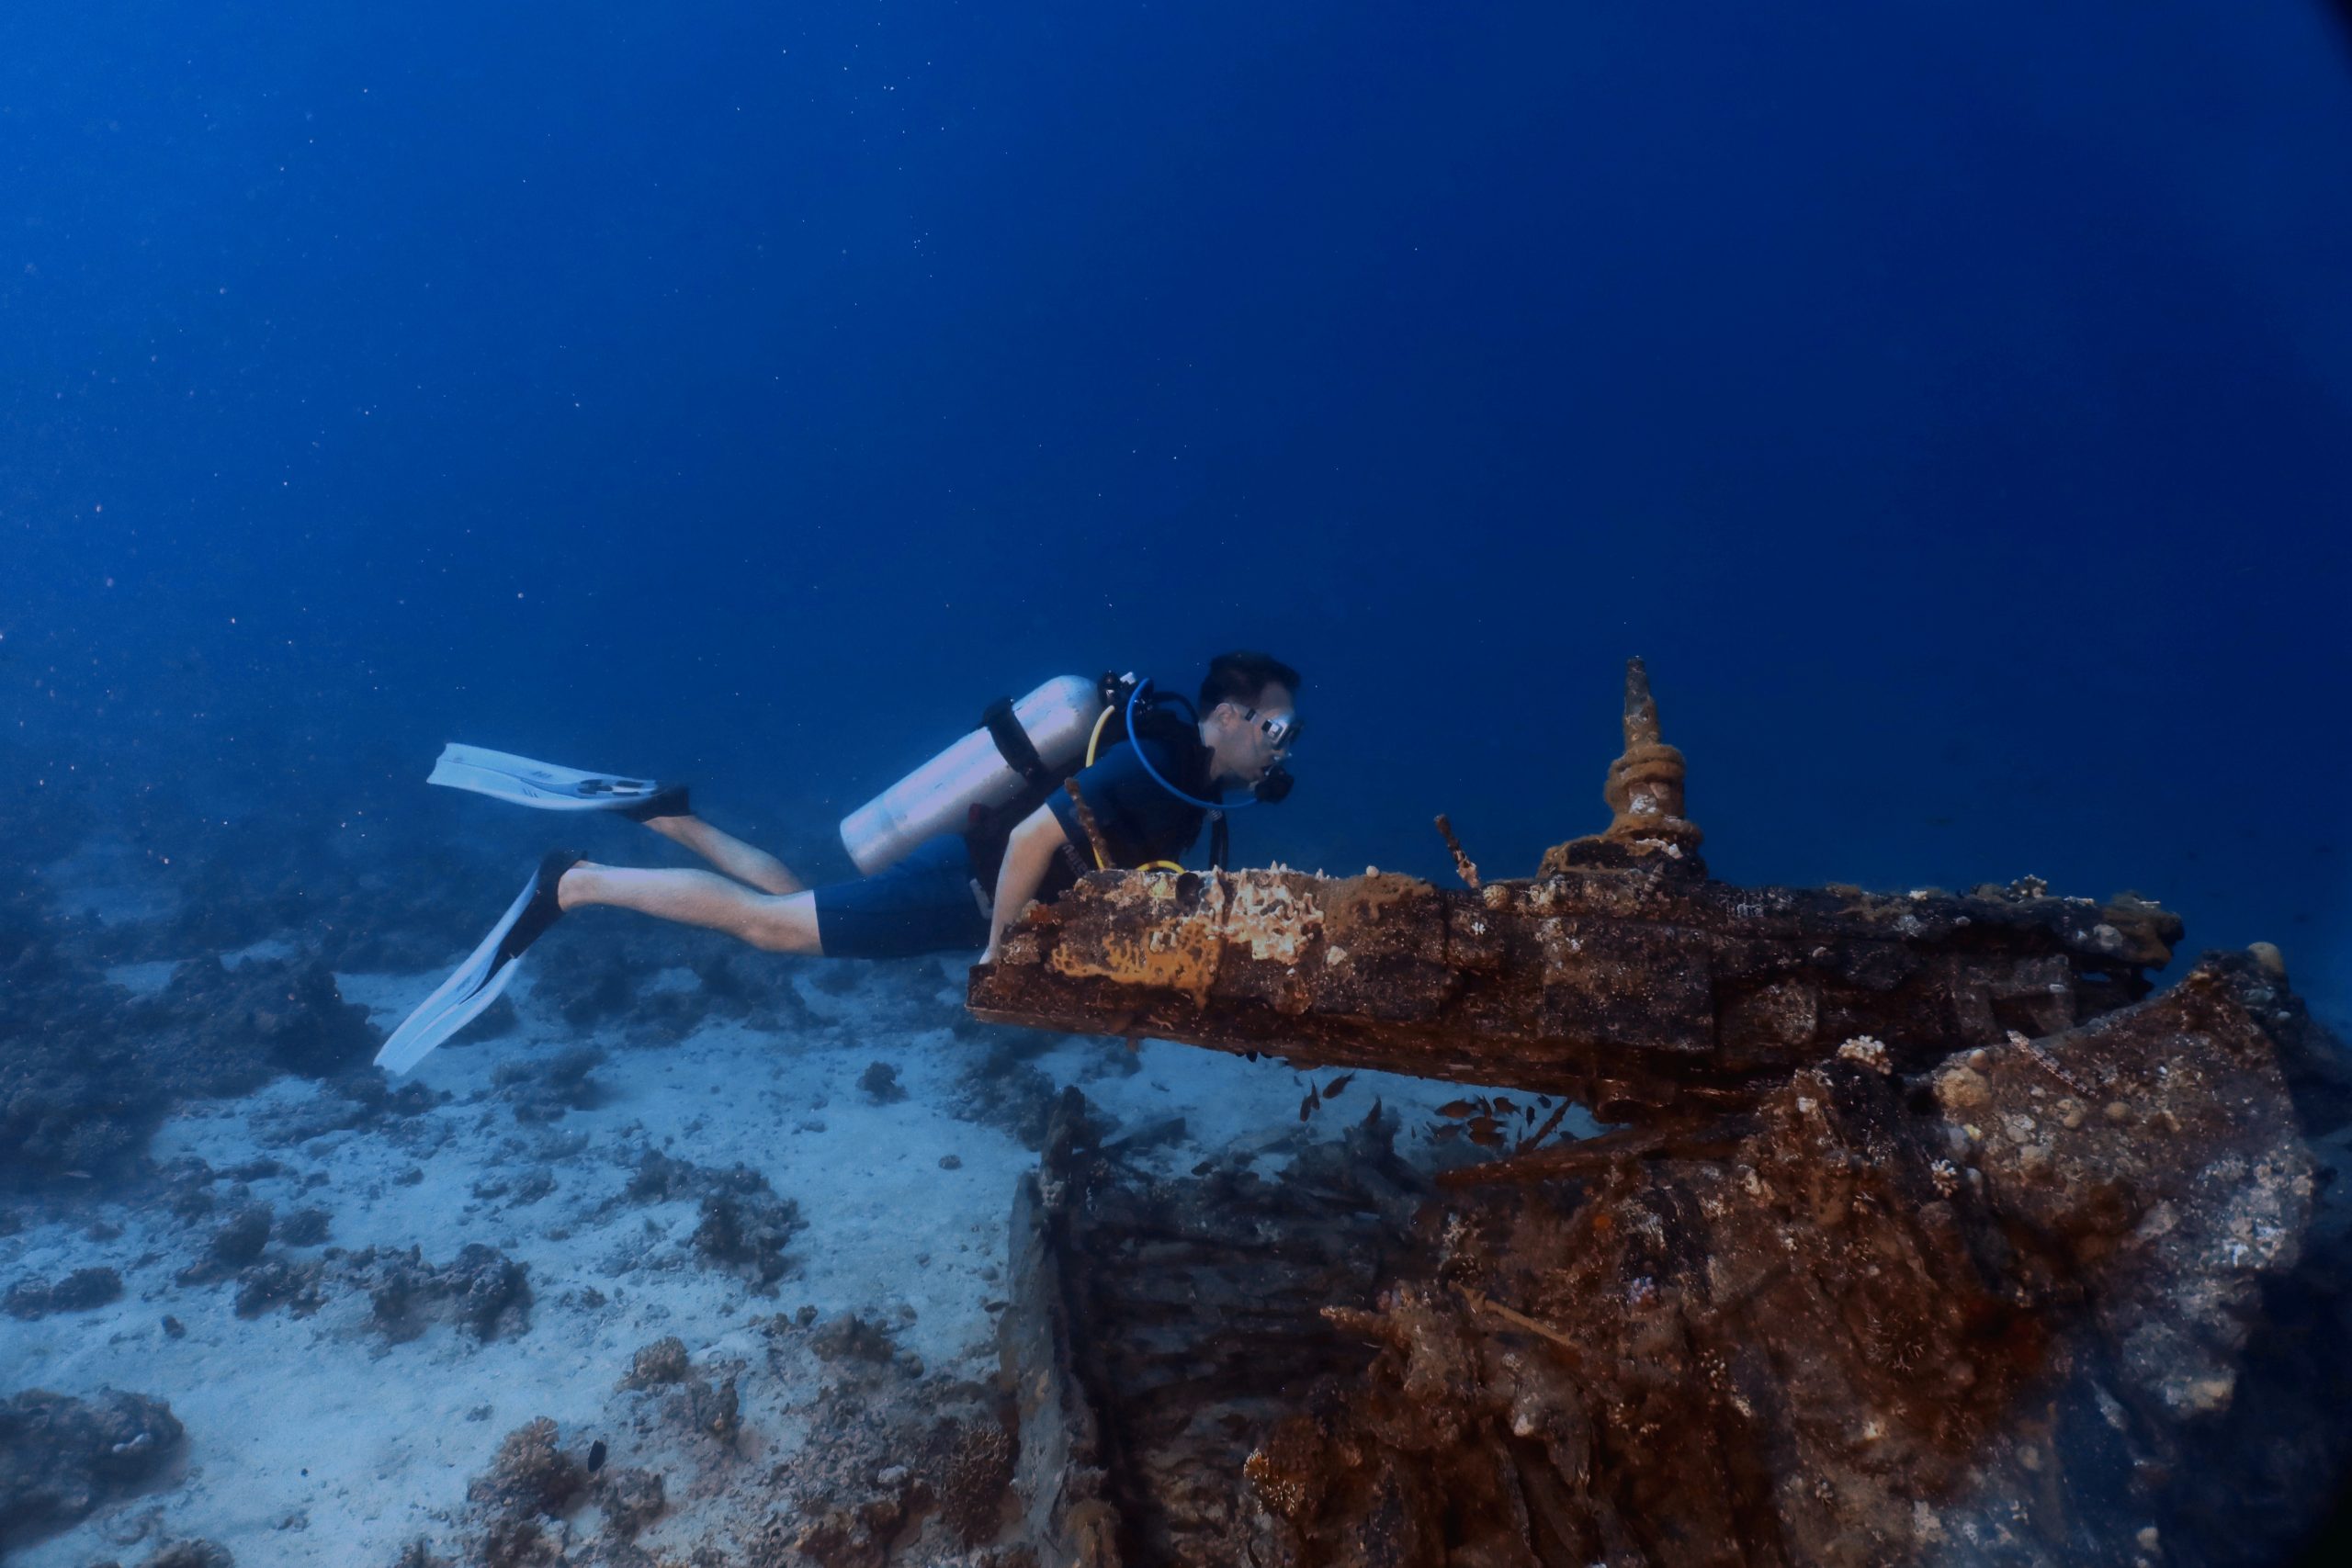 Hurghada's new underwater museum is great news for divers